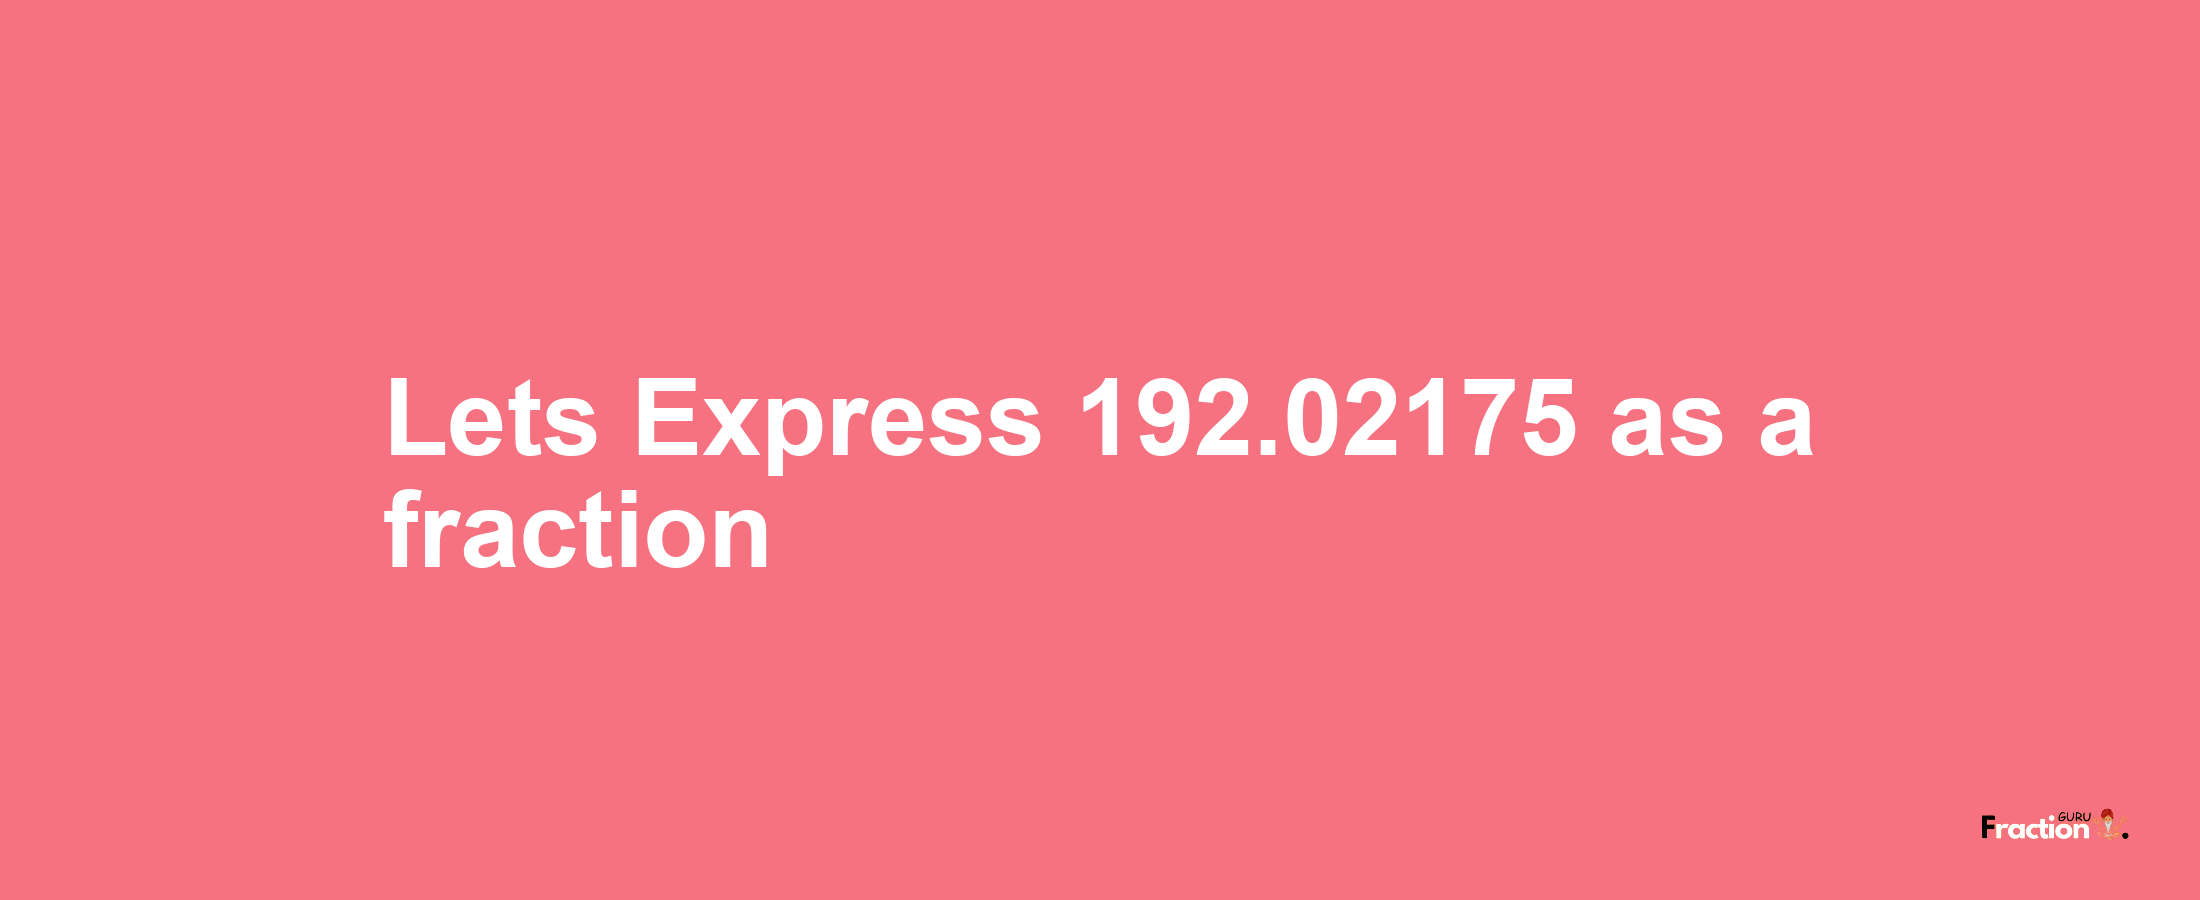 Lets Express 192.02175 as afraction